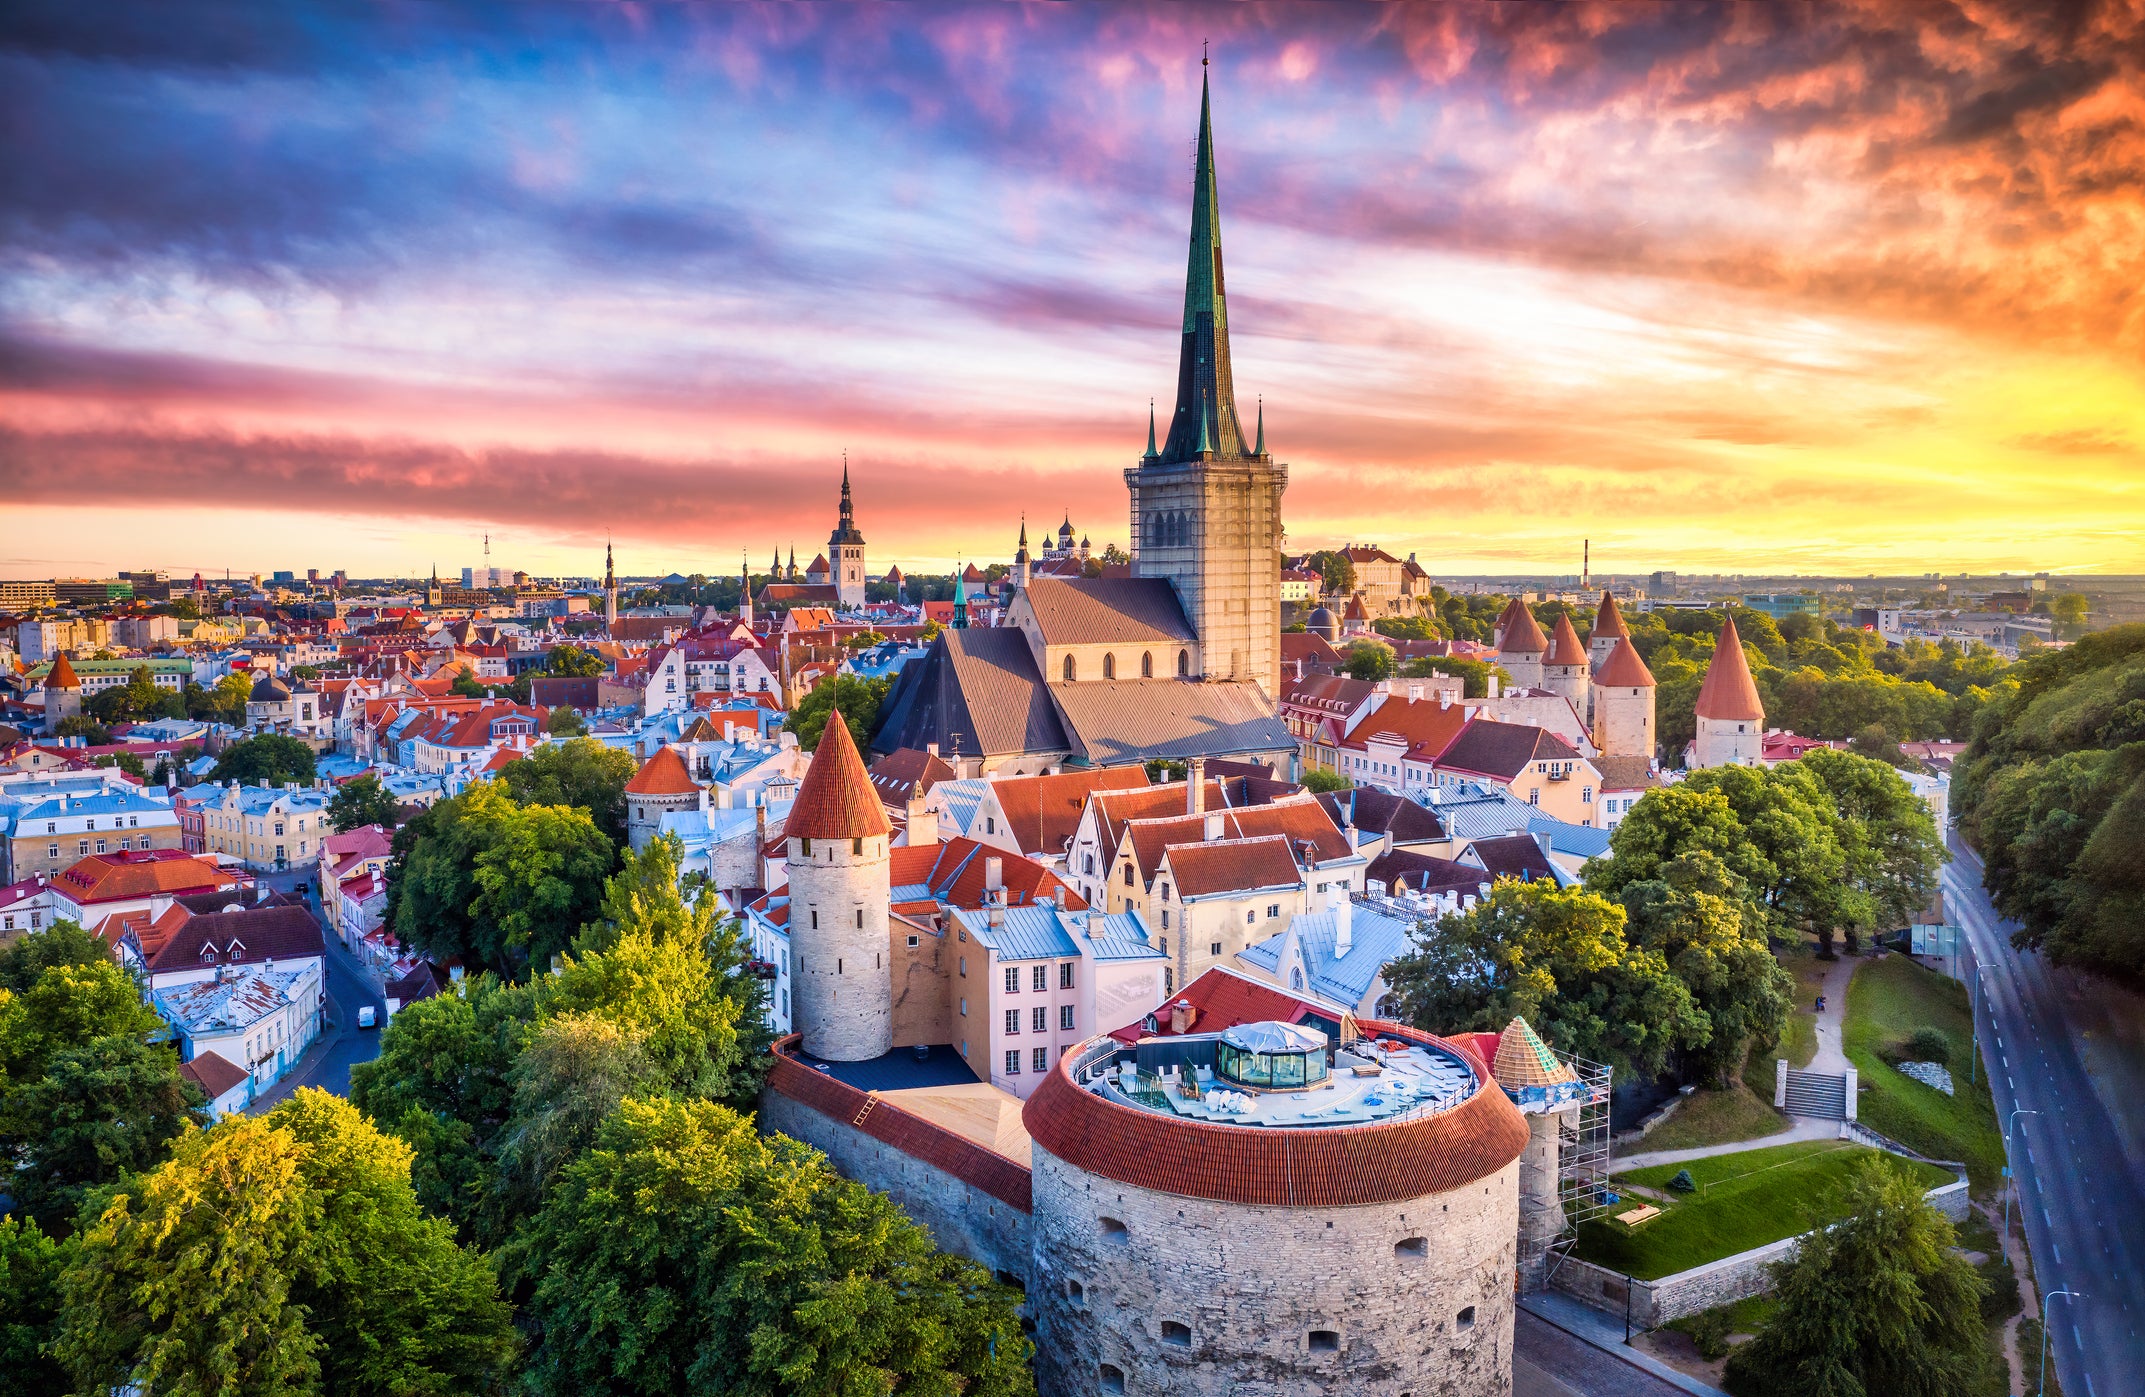 Tallinn, the capital of Estonia, is the perfect starting point for exploring eastern Europe